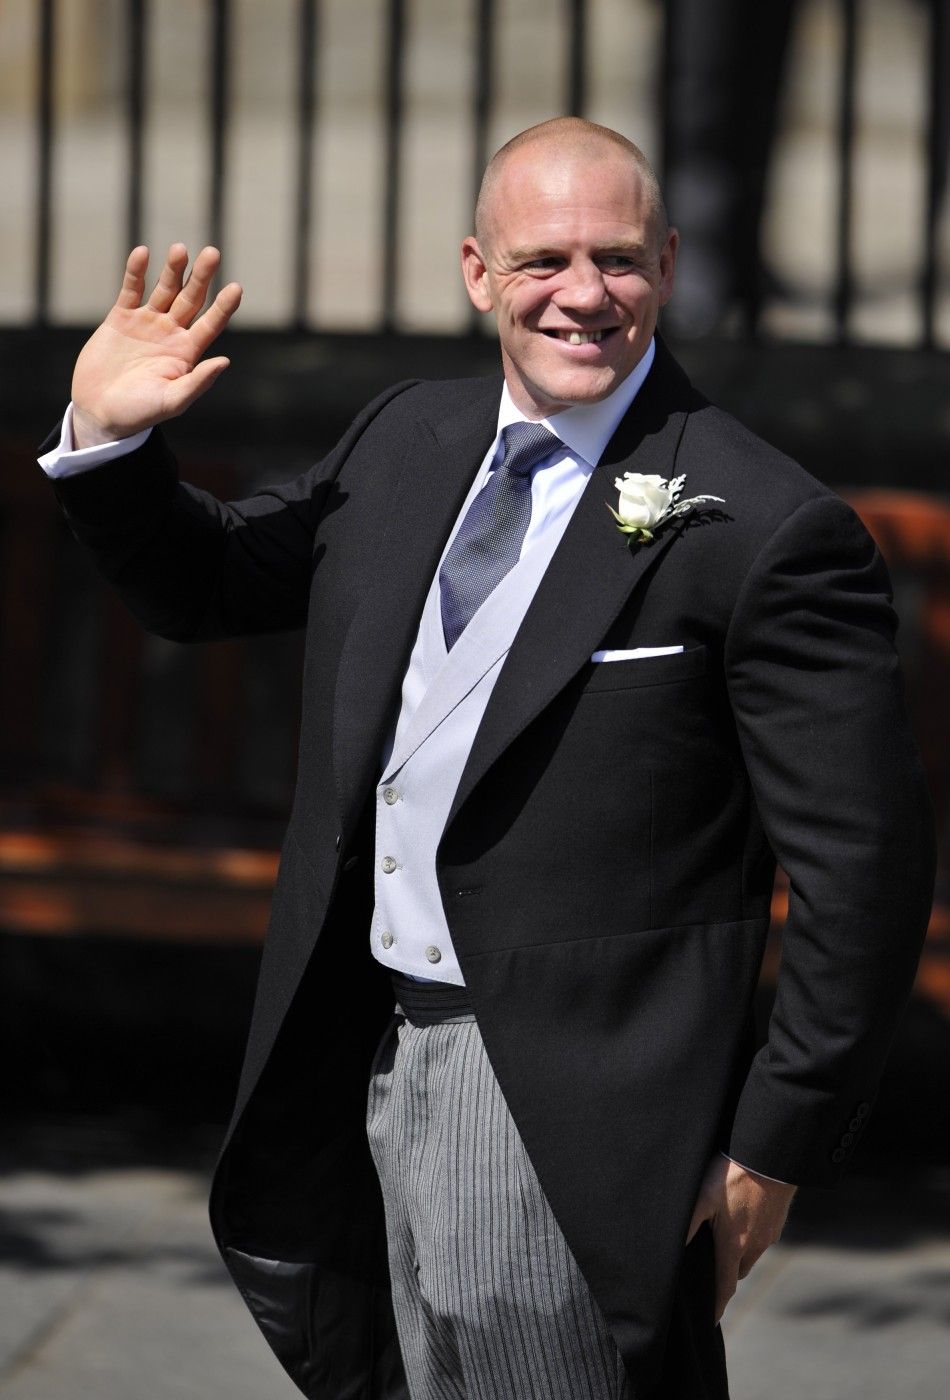 England rugby captain Mike Tindall 